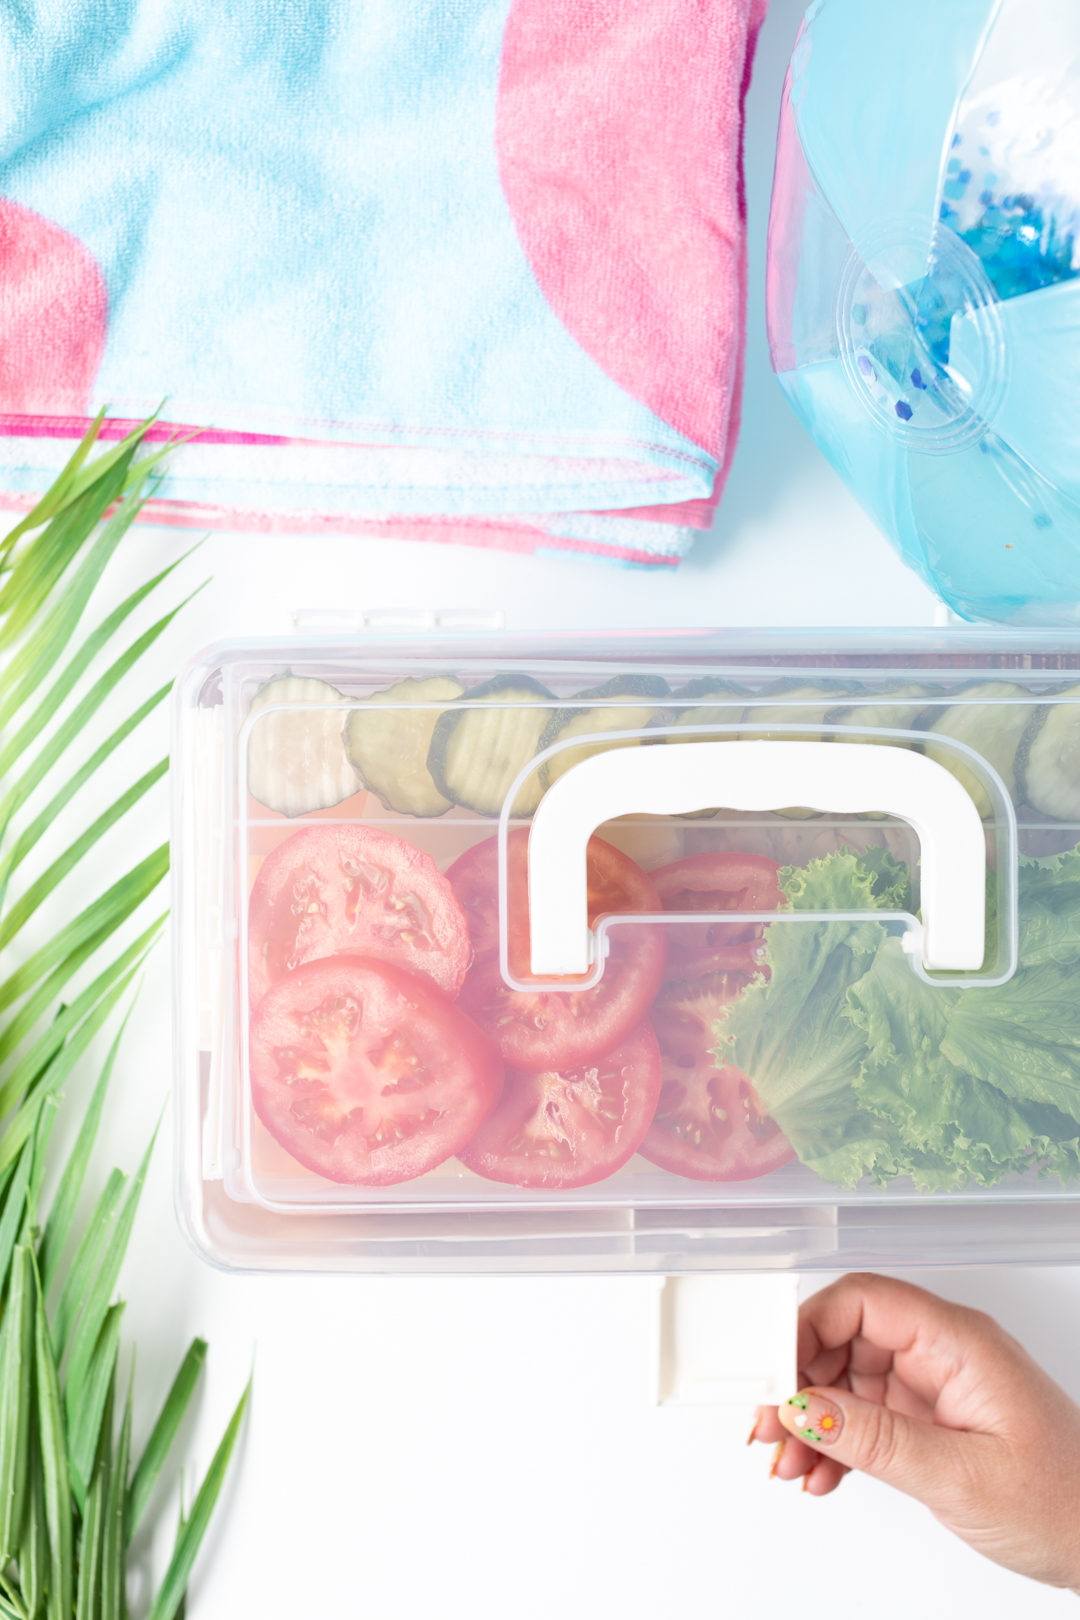 tackle box filled with sandwich toppings to take on the go.